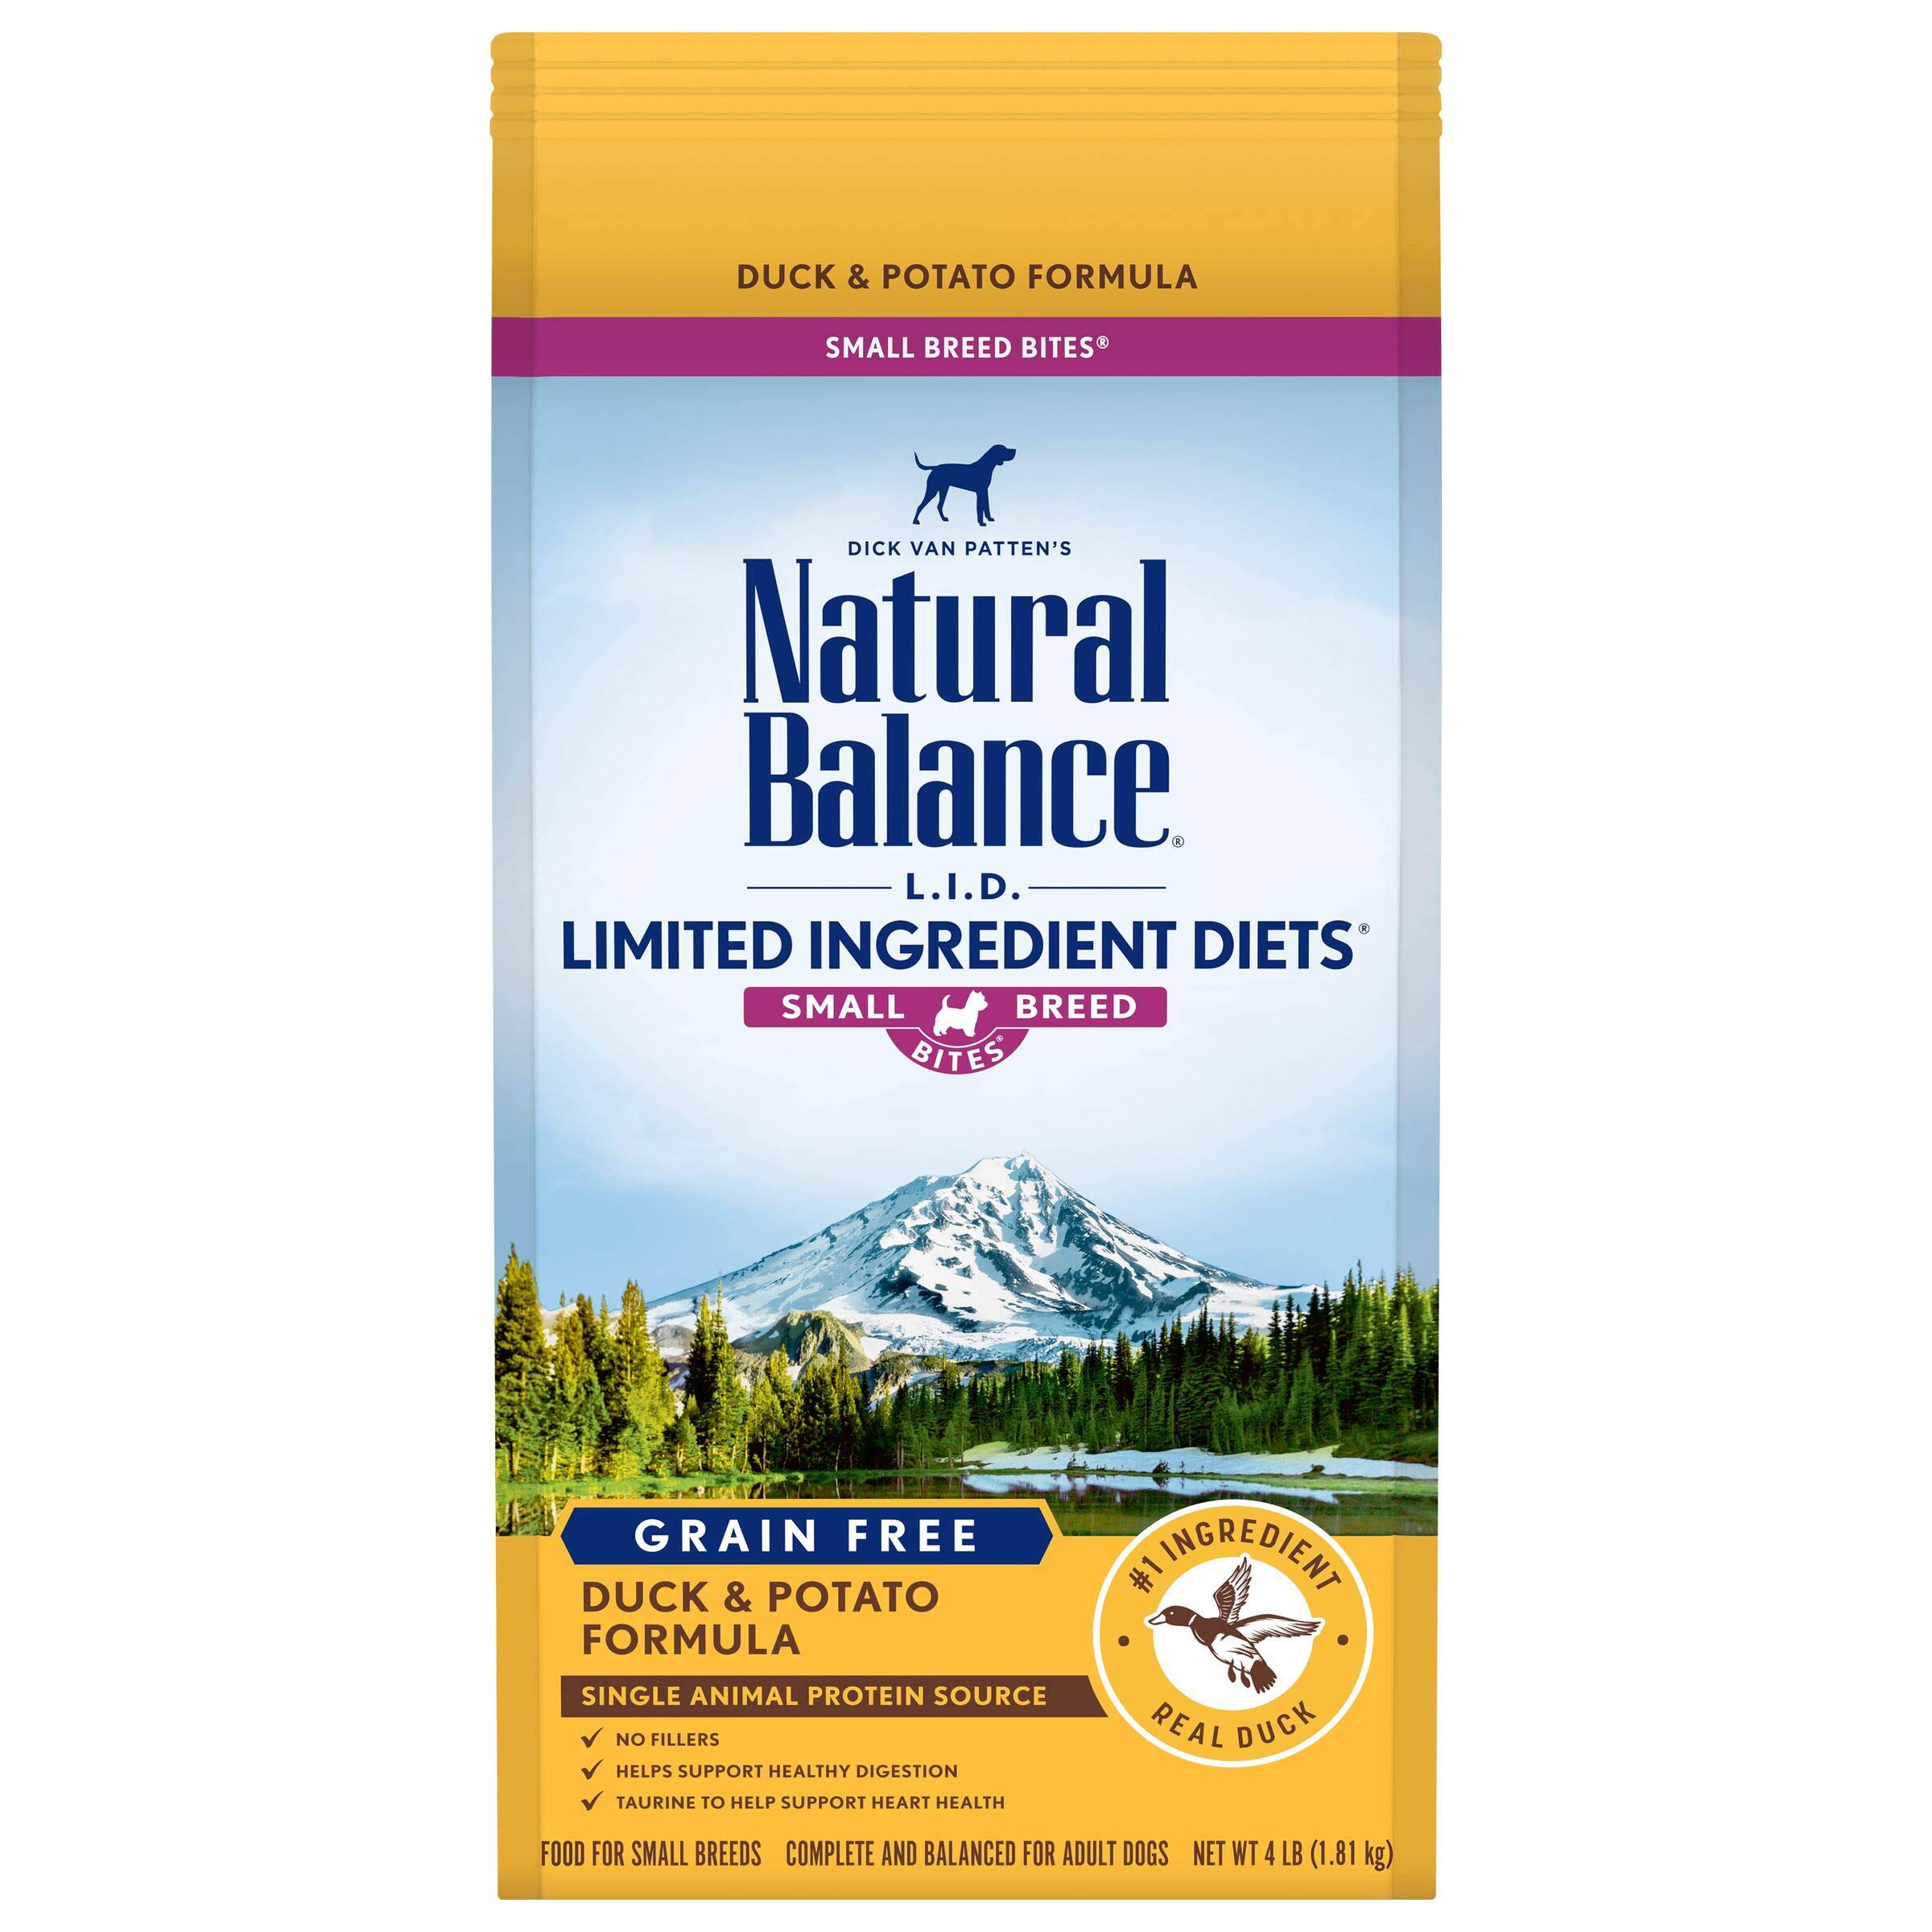 Natural Balance Limited Ingredients Diets Small Breed Bites Dog Food, Grain Free, Duck & Potato Formula - 4 lb